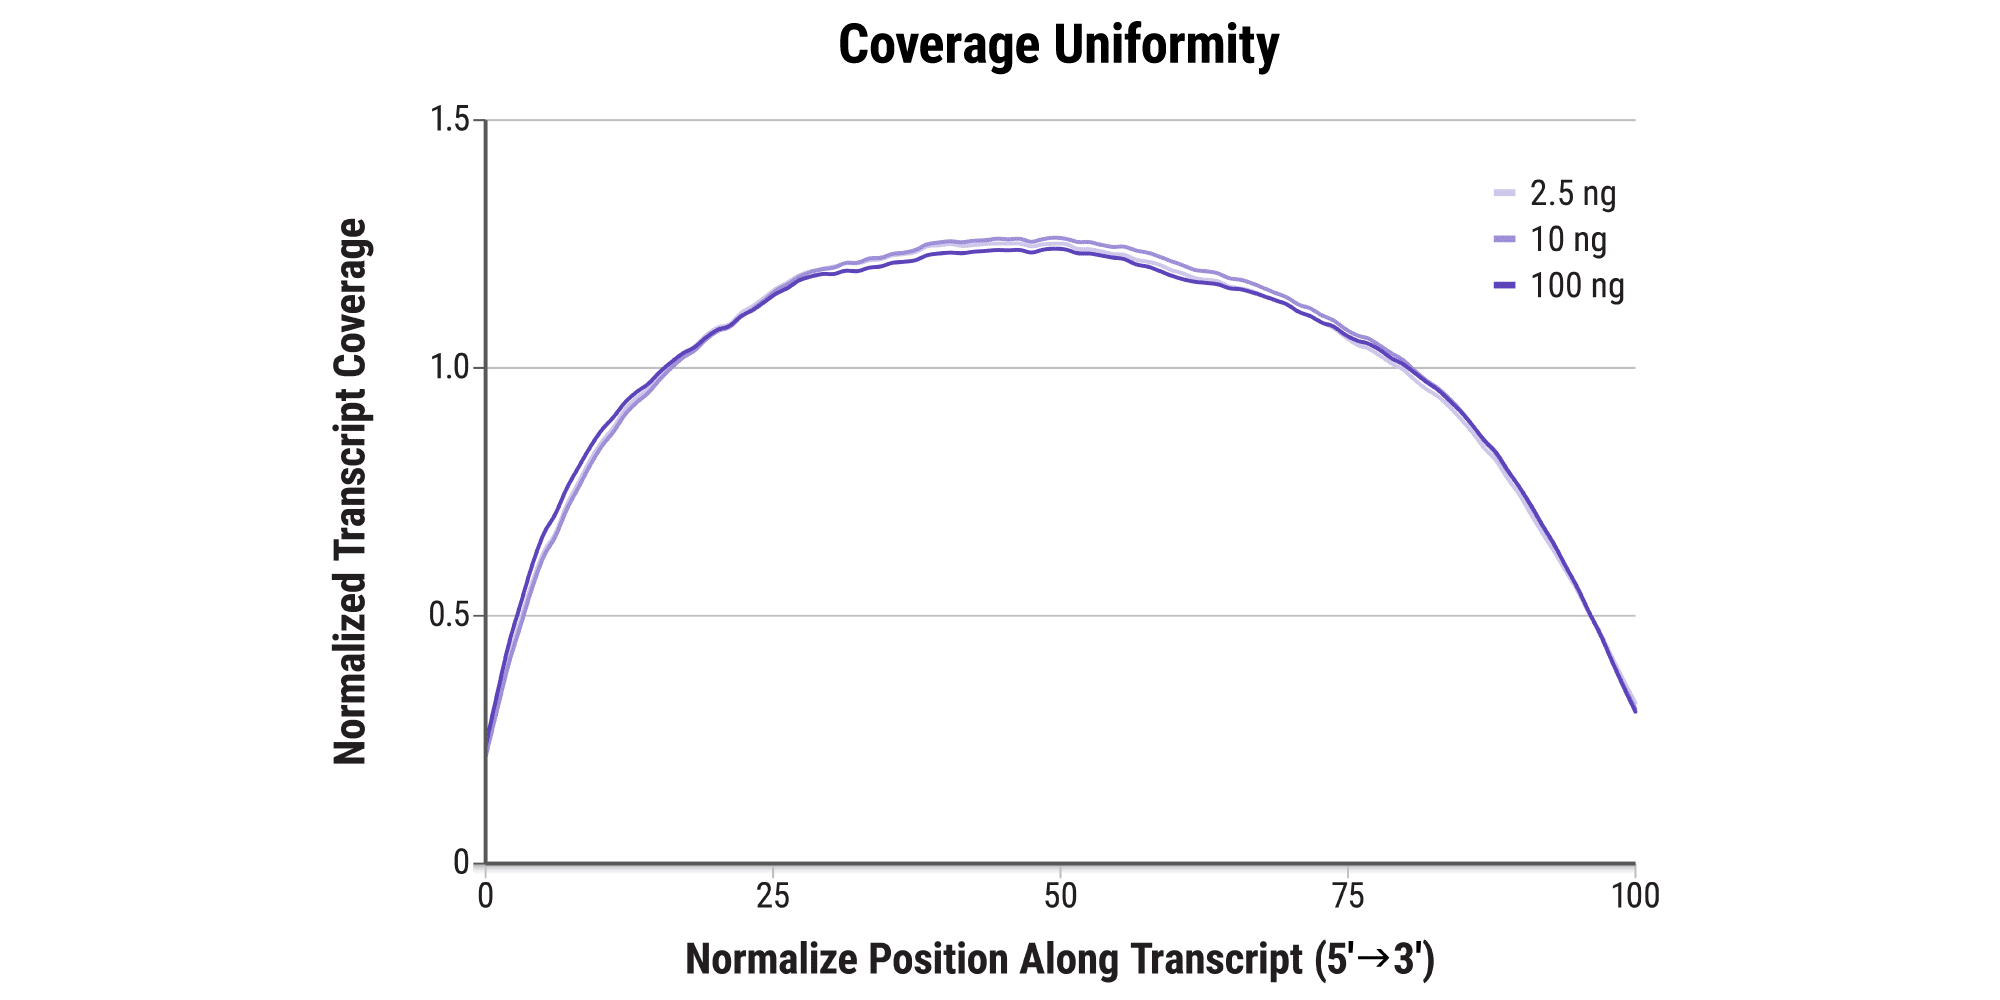 Figure 6A. Consistent performance across input amounts. RNA extracted from breast tissue (RIN 7) was used to prepare libraries in quadruplicate from a range of RNA mass inputs, as indicated, using the Watchmaker mRNA Library Prep Kit. Libraries were downsampled to 5M reads.   Normalized transcript coverage uniformity is consistent across all input amounts indicating robust and reproducible performance.